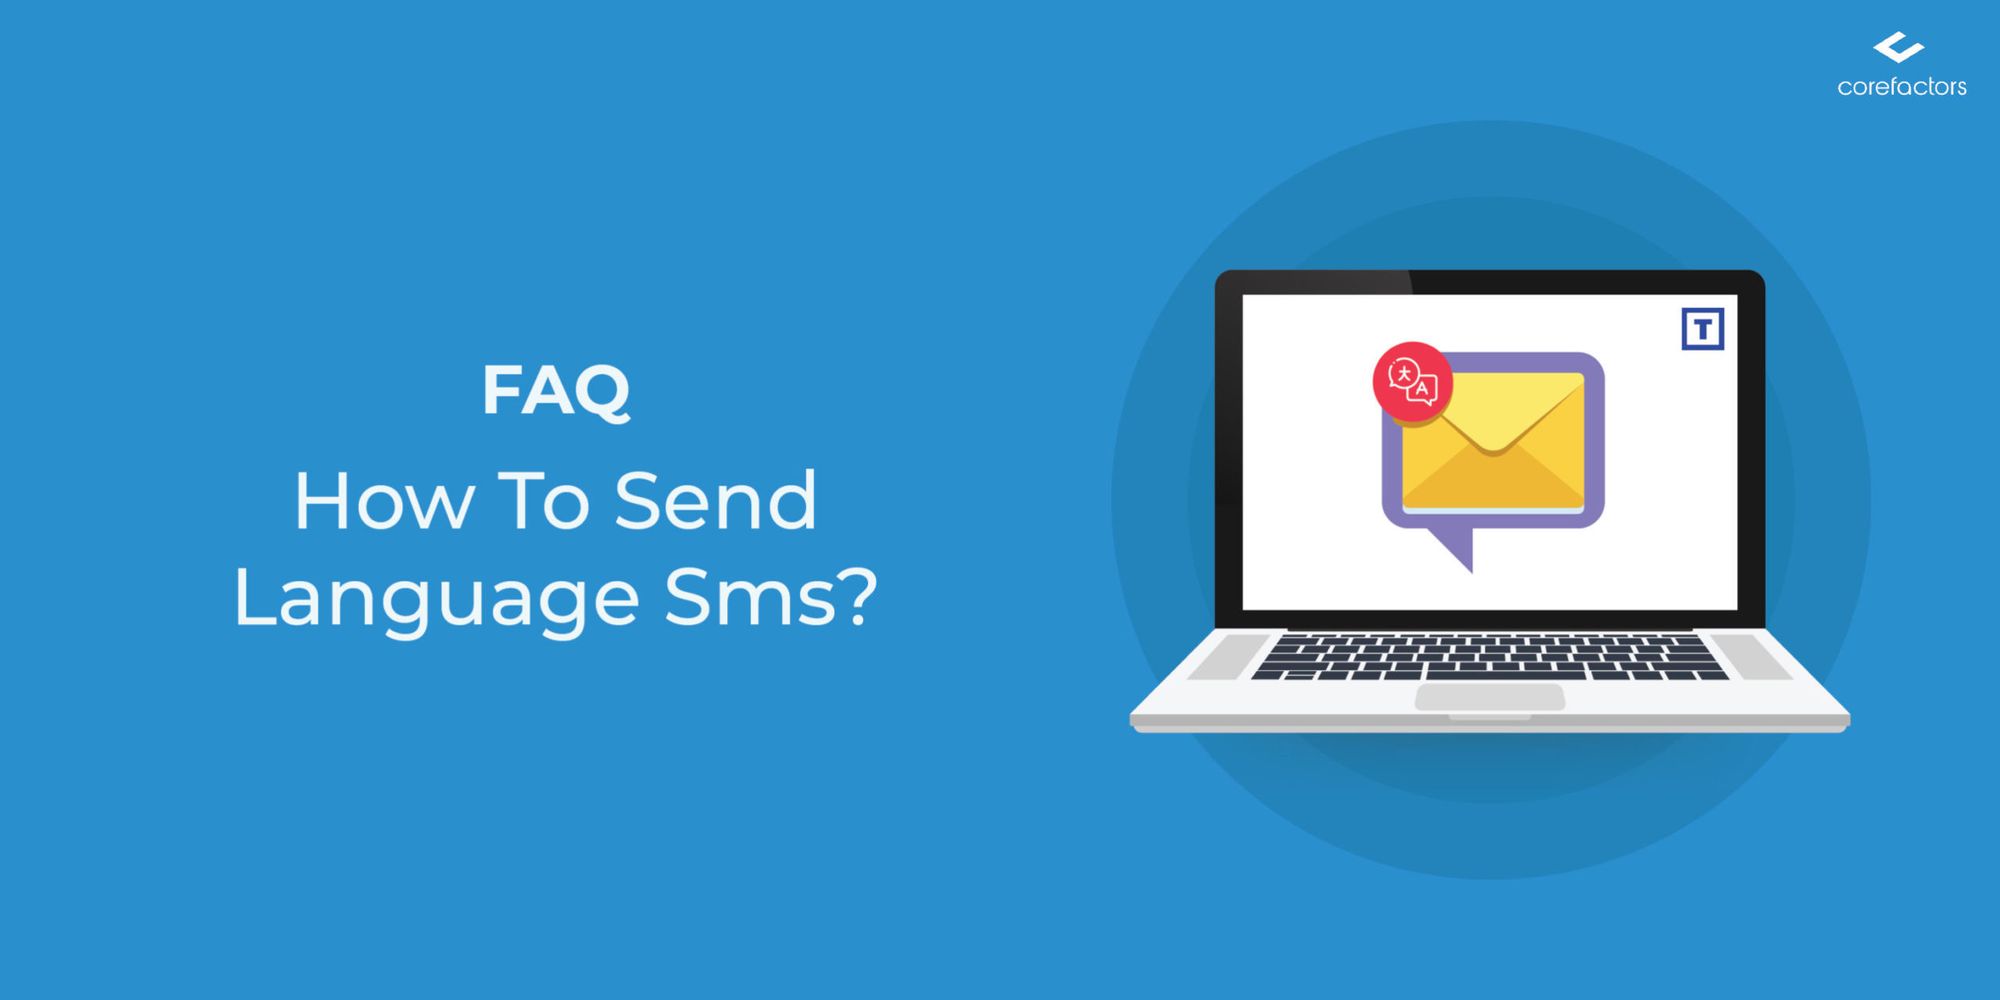 How to send Language SMS?